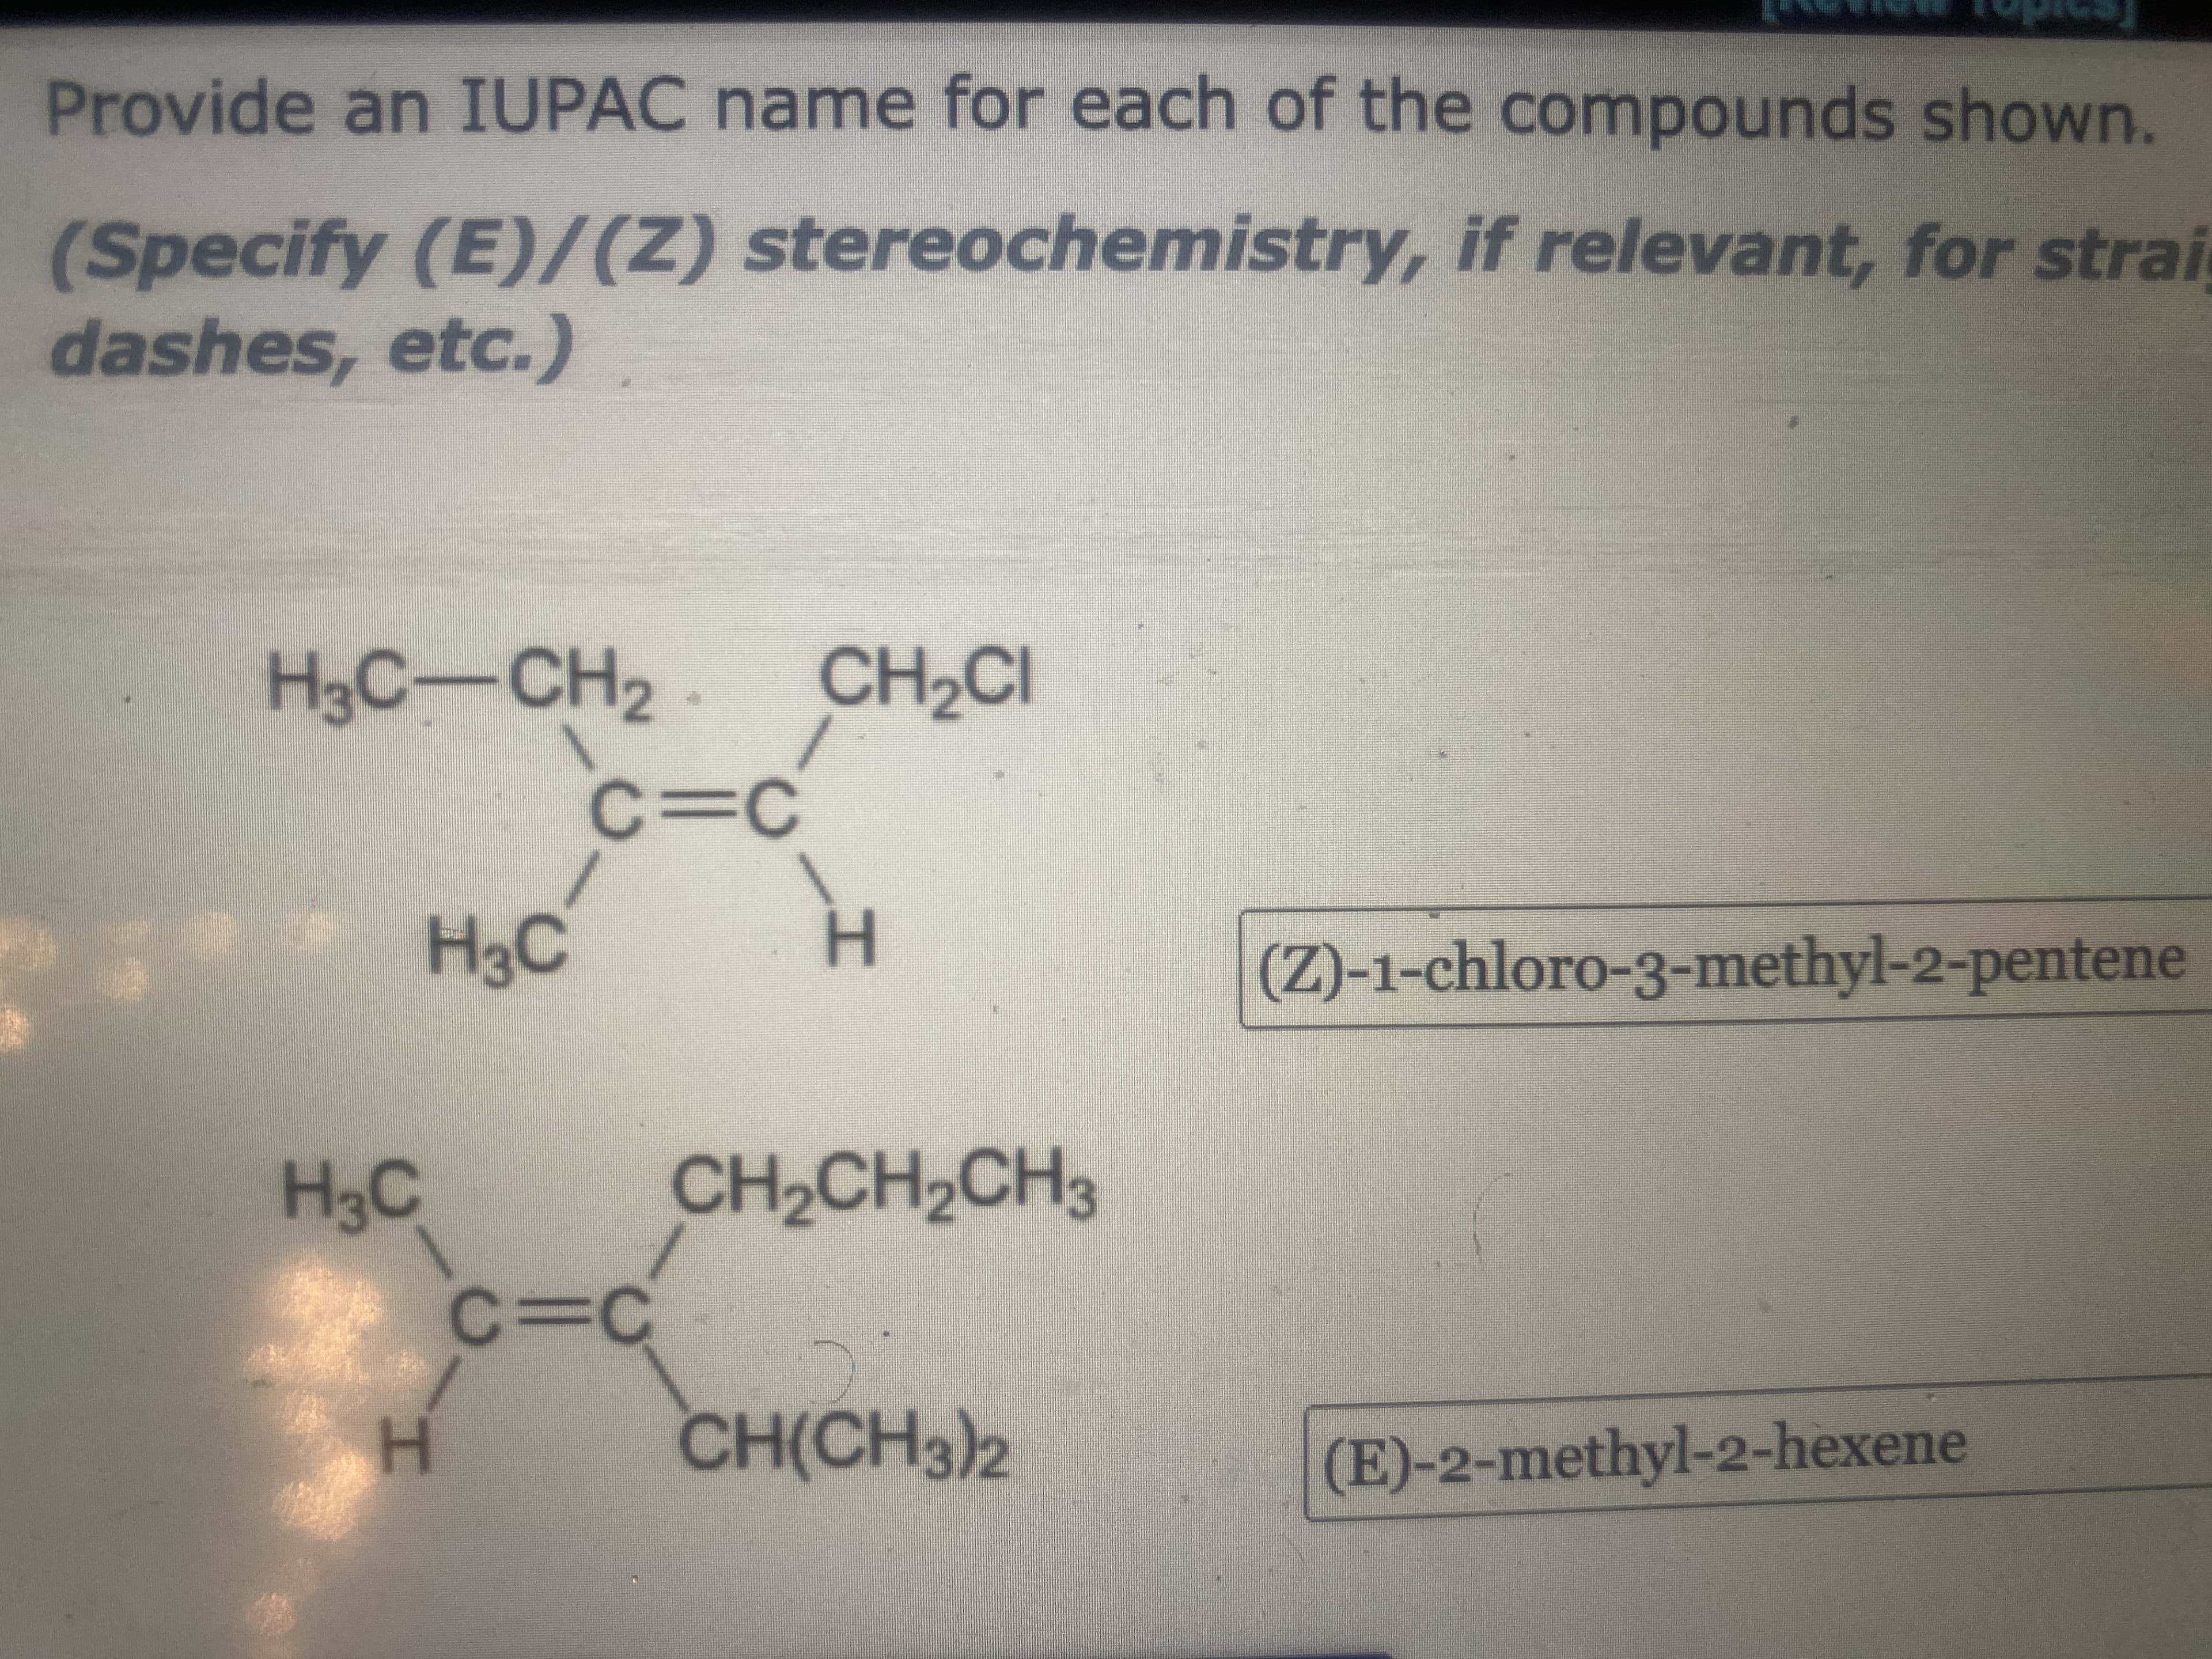 Provide an IUPAC name for each of the compounds shown.
dashes, etc.)
H3C-CH2
(Specify stereo if relevant, for strai
CH2CI
3DC
CH2CH2CH3
CH2CH2CH
H.
(Z)-1-chloro-3-methyl-2-pentene
C.
H.
CH(CH3)2
(E)-2-methyl-2-hexene
